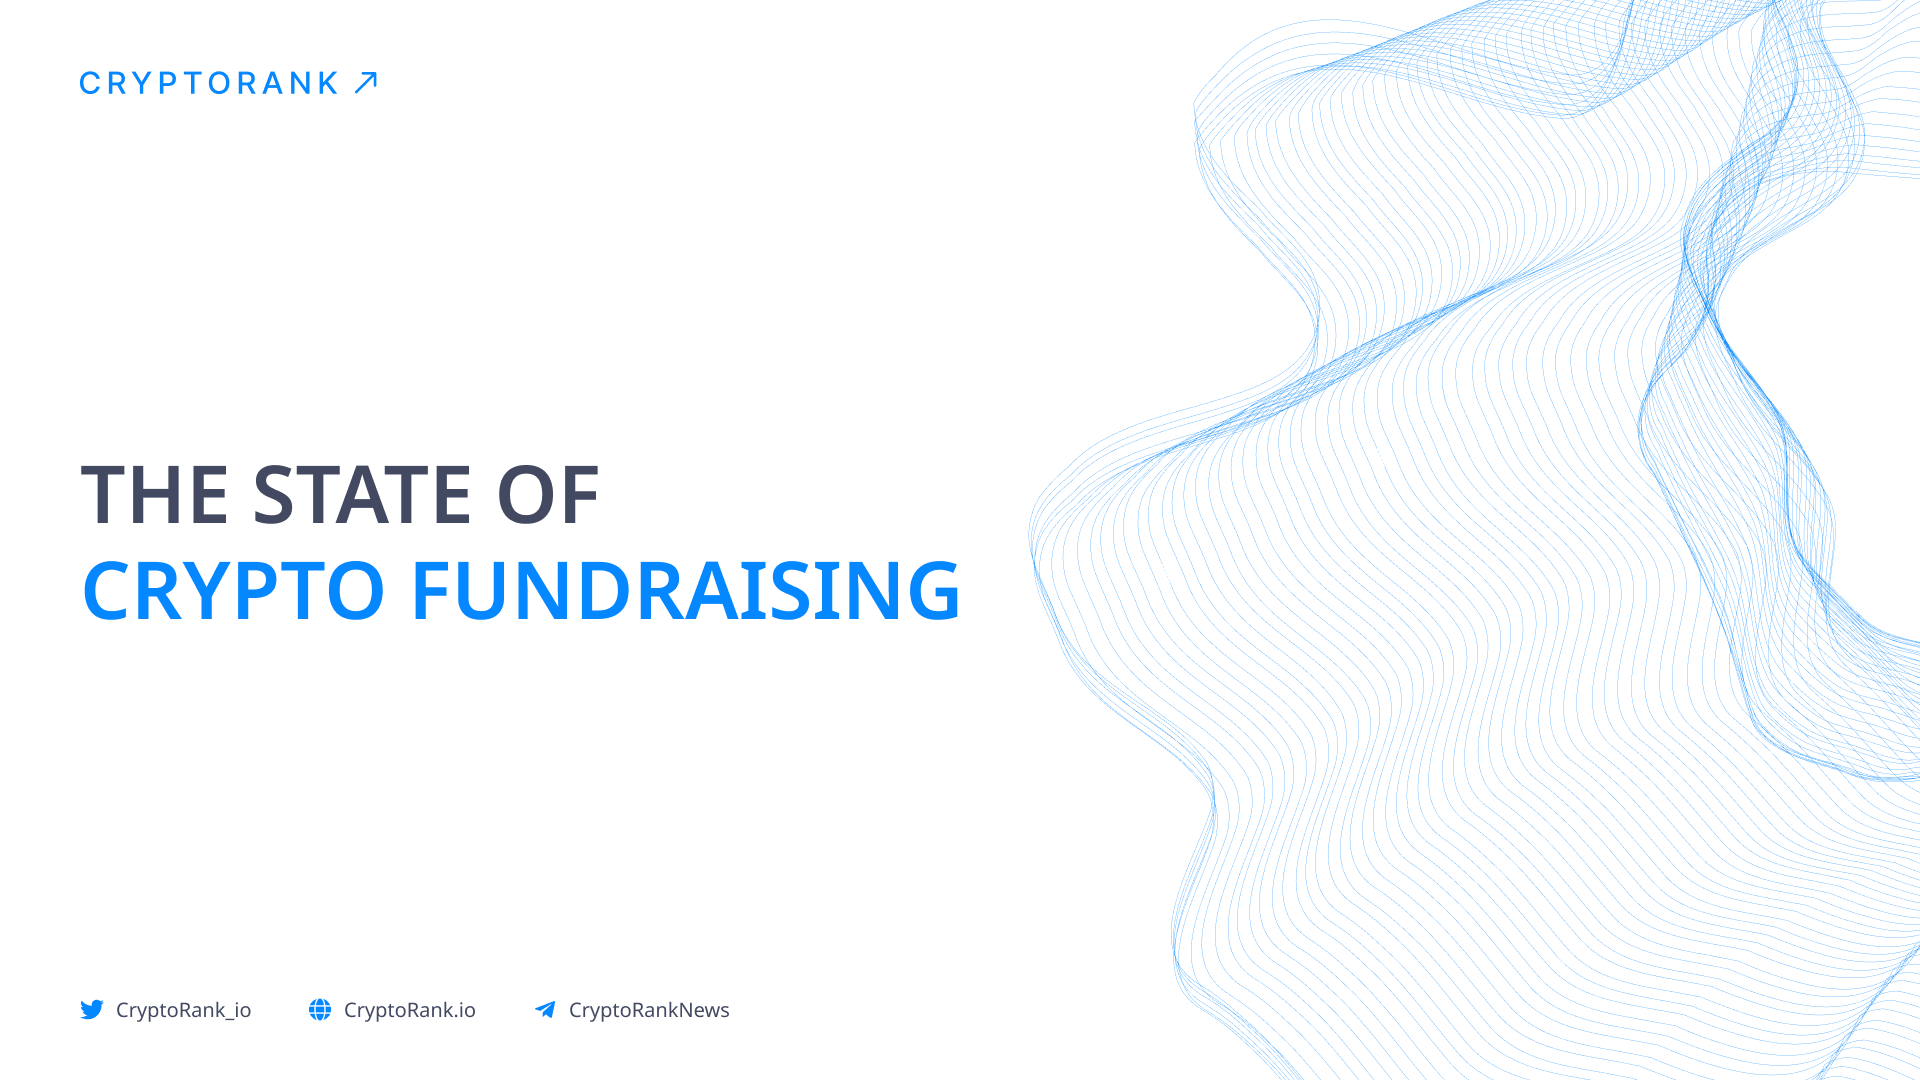 The State of Crypto Fundraising